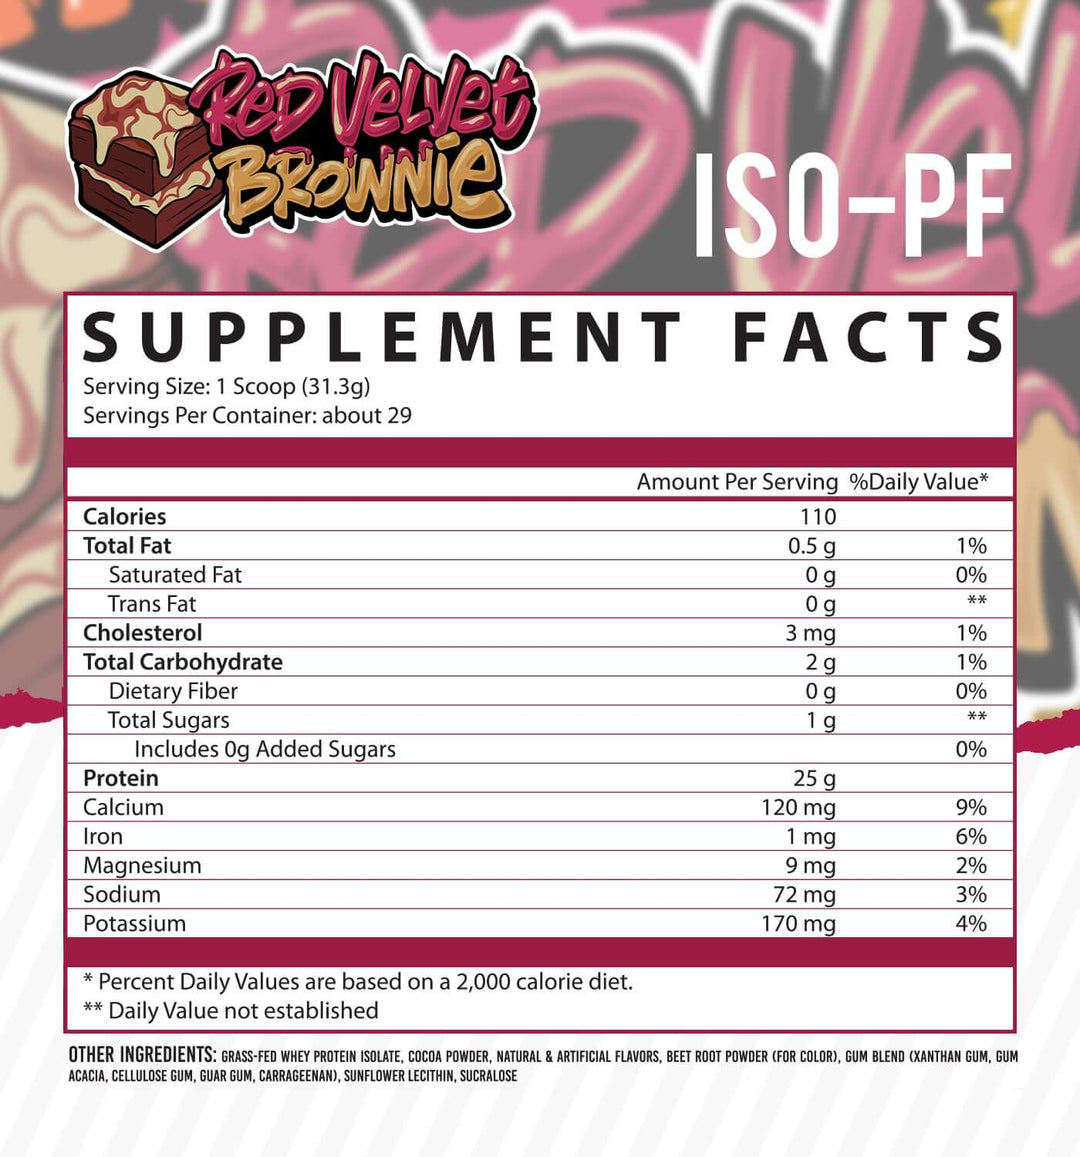 Inspired Nutraceuticals - ISO-PF: Pasture Fed Whey Isolate